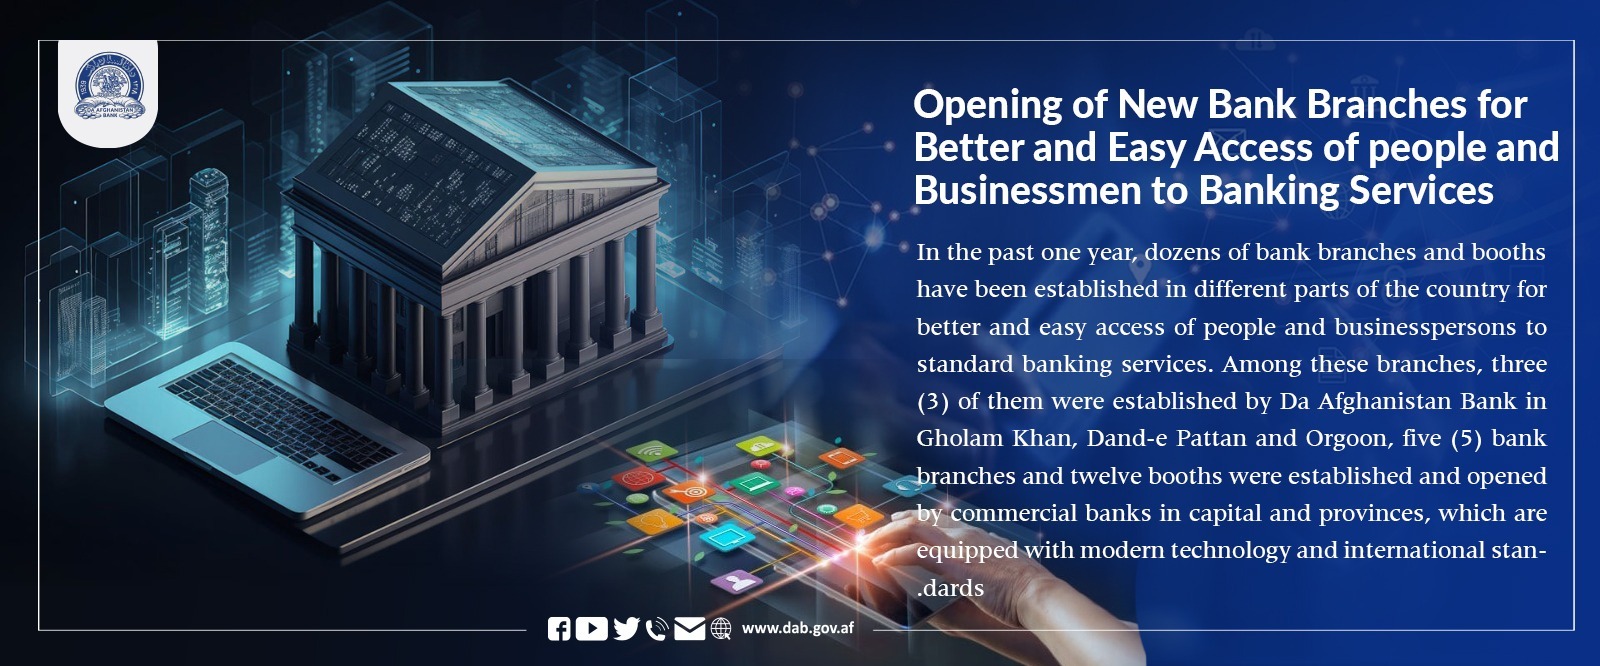 Opening of New Bank Branches for Better and Easy of people and Bussinessmen to Banking Services